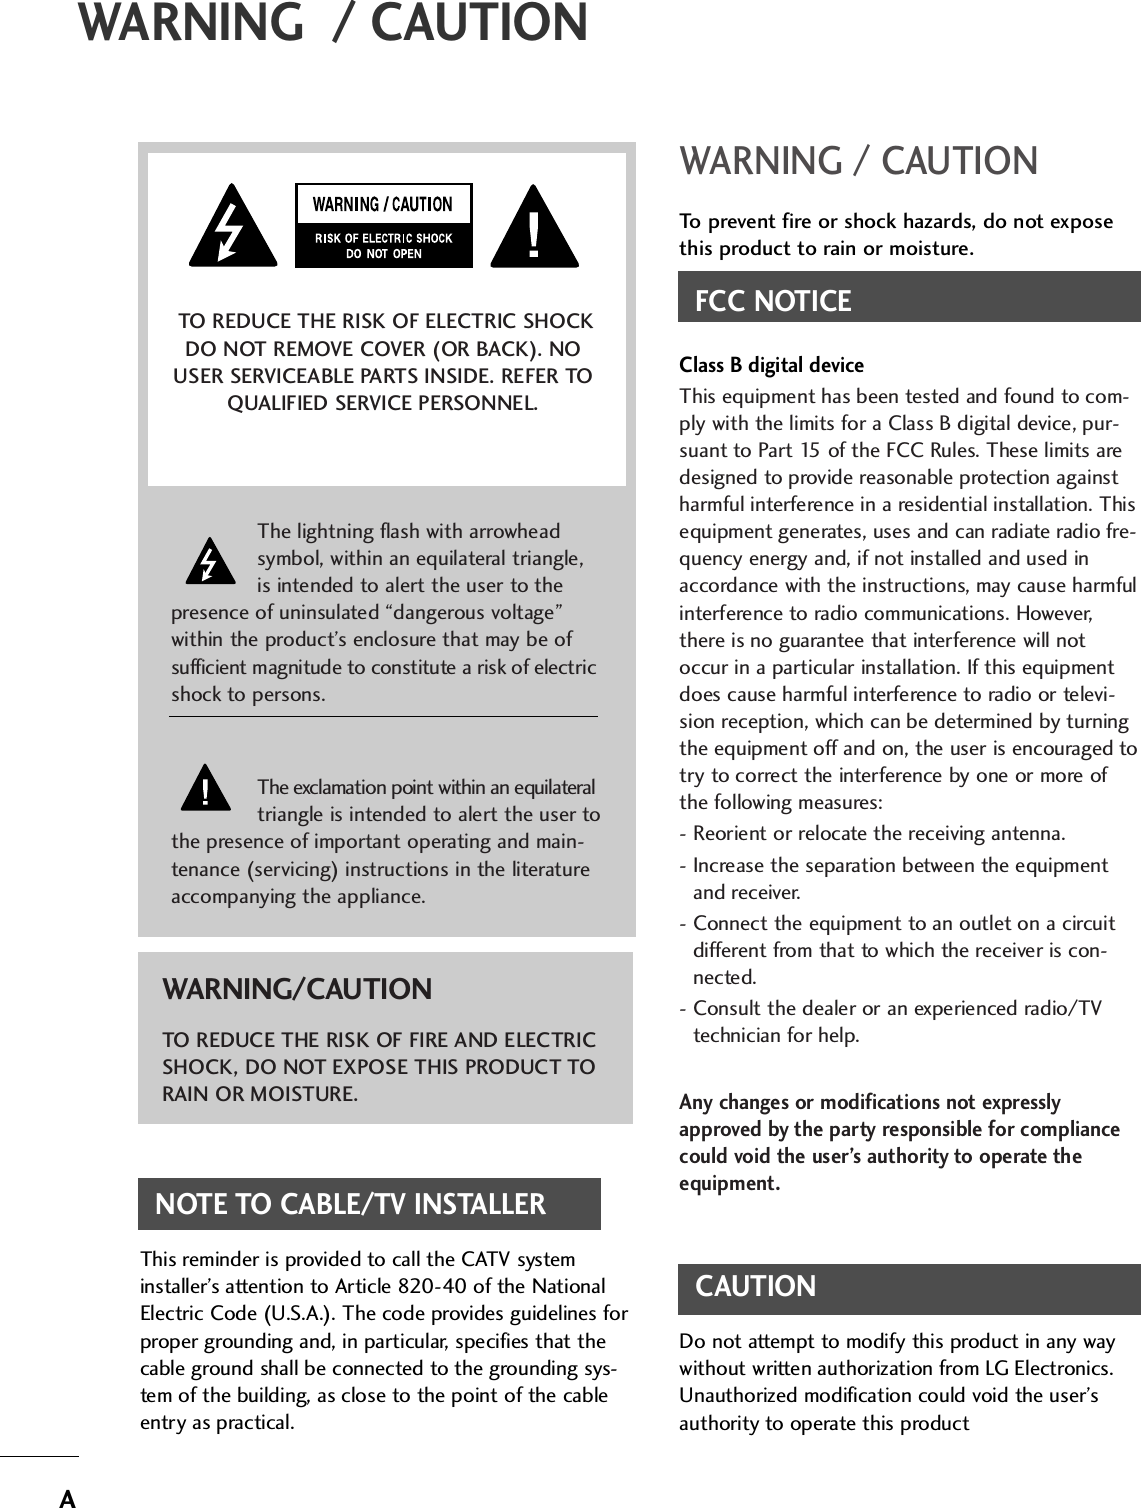 WARNING / CAUTIONTo prevent fire or shock hazards, do not exposethis product to rain or moisture.FCC NOTICEClass B digital deviceThis equipment has been tested and found to com-ply with the limits for a Class B digital device, pur-suant to Part 15 of the FCC Rules. These limits aredesigned to provide reasonable protection againstharmful interference in a residential installation. Thisequipment generates, uses and can radiate radio fre-quency energy and, if not installed and used inaccordance with the instructions, may cause harmfulinterference to radio communications. However,there is no guarantee that interference will notoccur in a particular installation. If this equipmentdoes cause harmful interference to radio or televi-sion reception, which can be determined by turningthe equipment off and on, the user is encouraged totry to correct the interference by one or more ofthe following measures:- Reorient or relocate the receiving antenna.- Increase the separation between the equipmentand receiver.- Connect the equipment to an outlet on a circuitdifferent from that to which the receiver is con-nected.- Consult the dealer or an experienced radio/TVtechnician for help.Any changes or modifications not expresslyapproved by the party responsible for compliancecould void the user’s authority to operate theequipment.CAUTIONDo not attempt to modify this product in any waywithout written authorization from LG Electronics.Unauthorized modification could void the user’sauthority to operate this product The lightning flash with arrowheadsymbol, within an equilateral triangle,is intended to alert the user to thepresence of uninsulated “dangerous voltage”within the product’s enclosure that may be ofsufficient magnitude to constitute a risk of electricshock to persons.The exclamation point within an equilateraltriangle is intended to alert the user tothe presence of important operating and main-tenance (servicing) instructions in the literatureaccompanying the appliance.TO REDUCE THE RISK OF ELECTRIC SHOCKDO NOT REMOVE COVER (OR BACK). NOUSER SERVICEABLE PARTS INSIDE. REFER TOQUALIFIED SERVICE PERSONNEL.WARNING/CAUTIONTO REDUCE THE RISK OF FIRE AND ELECTRICSHOCK, DO NOT EXPOSE THIS PRODUCT TORAIN OR MOISTURE.NOTE TO CABLE/TV INSTALLERThis reminder is provided to call the CATV systeminstaller’s attention to Article 820-40 of the NationalElectric Code (U.S.A.). The code provides guidelines forproper grounding and, in particular, specifies that thecable ground shall be connected to the grounding sys-tem of the building, as close to the point of the cableentry as practical.WARNING  / CAUTIONA